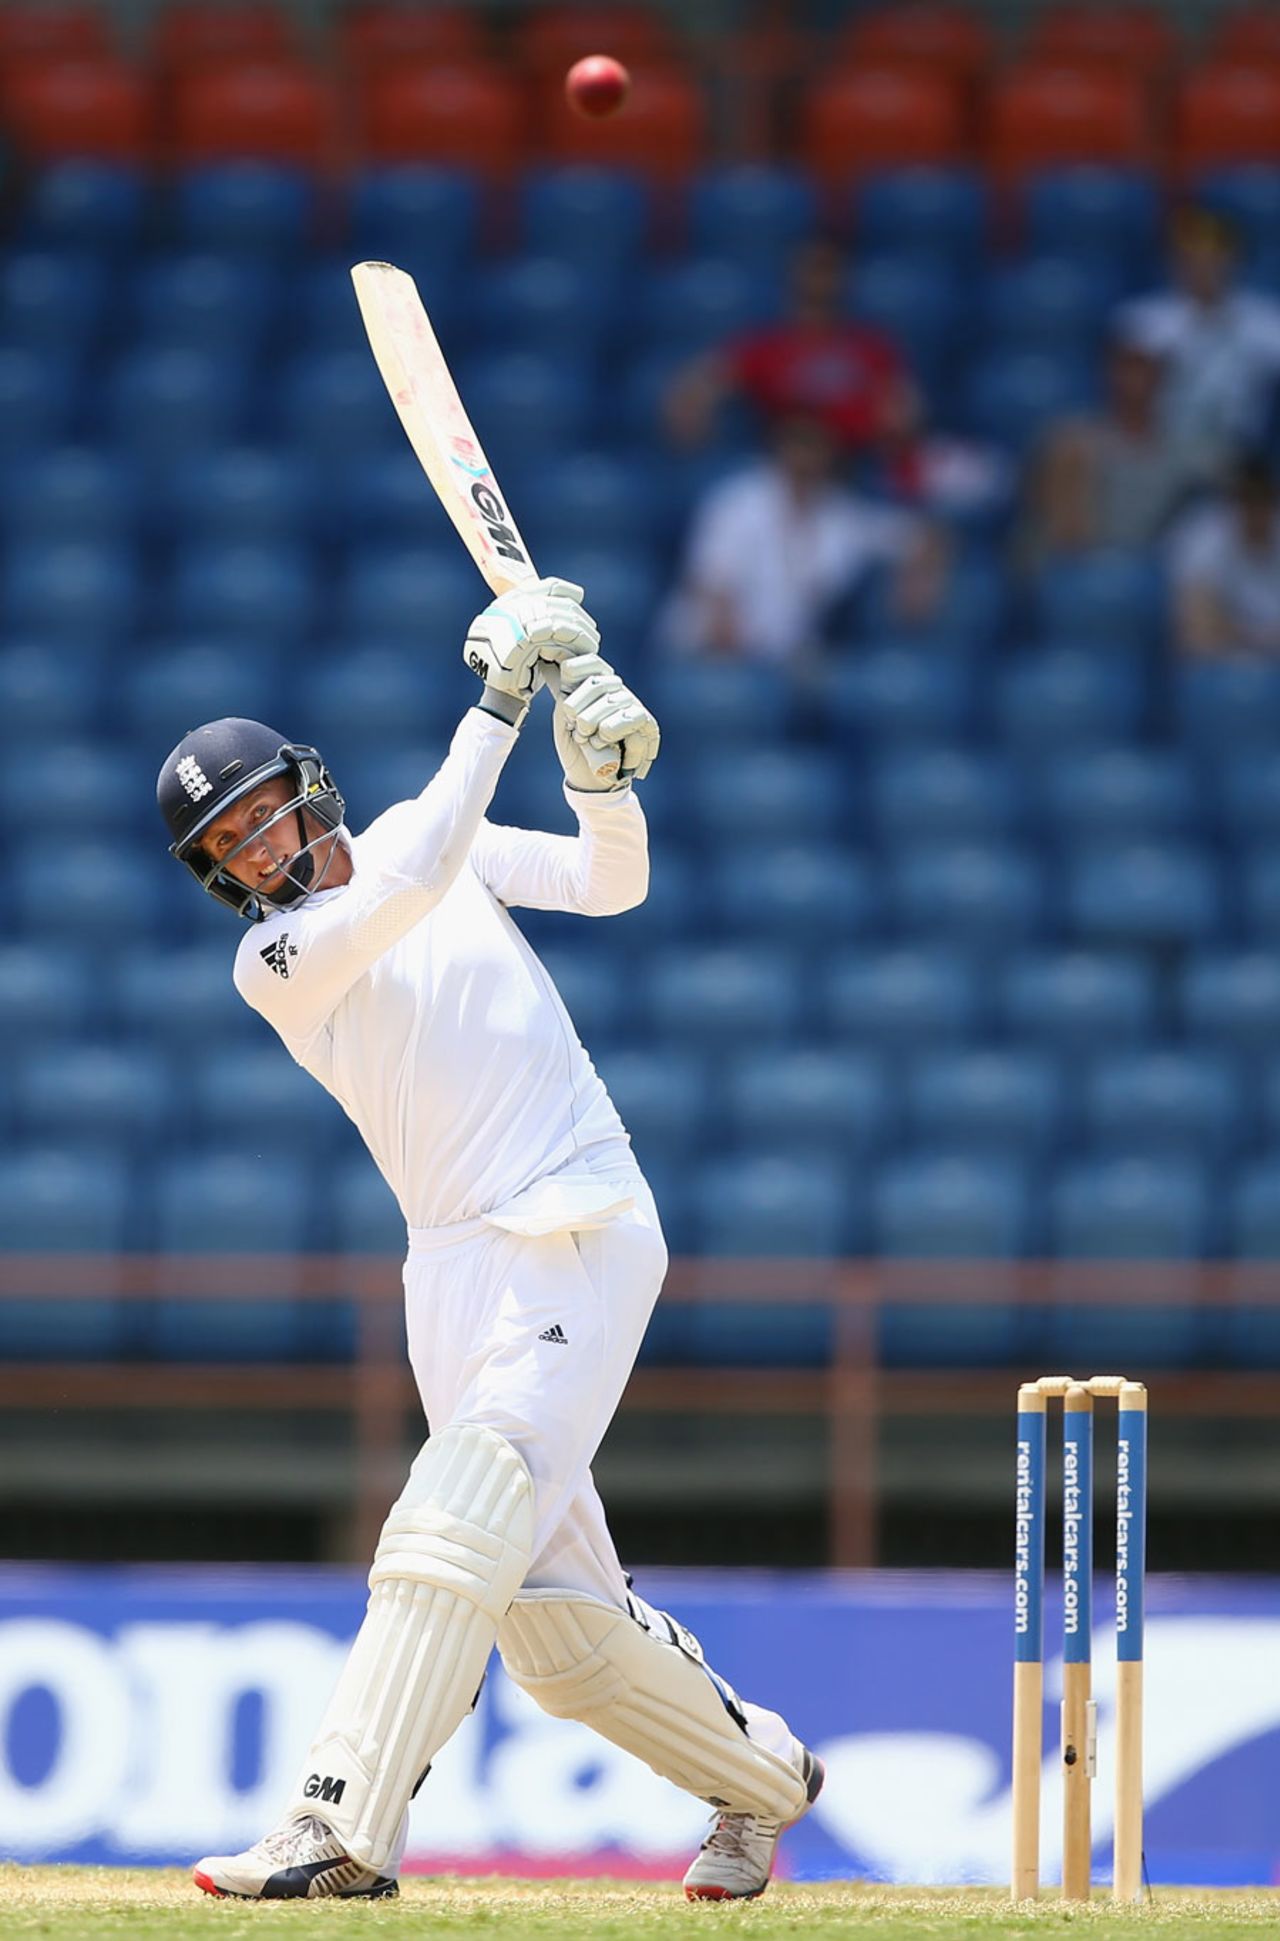 Joe Root pushed England's total ever higher, West Indies v England, 2nd Test, St George's, 4th day, April 24, 2015